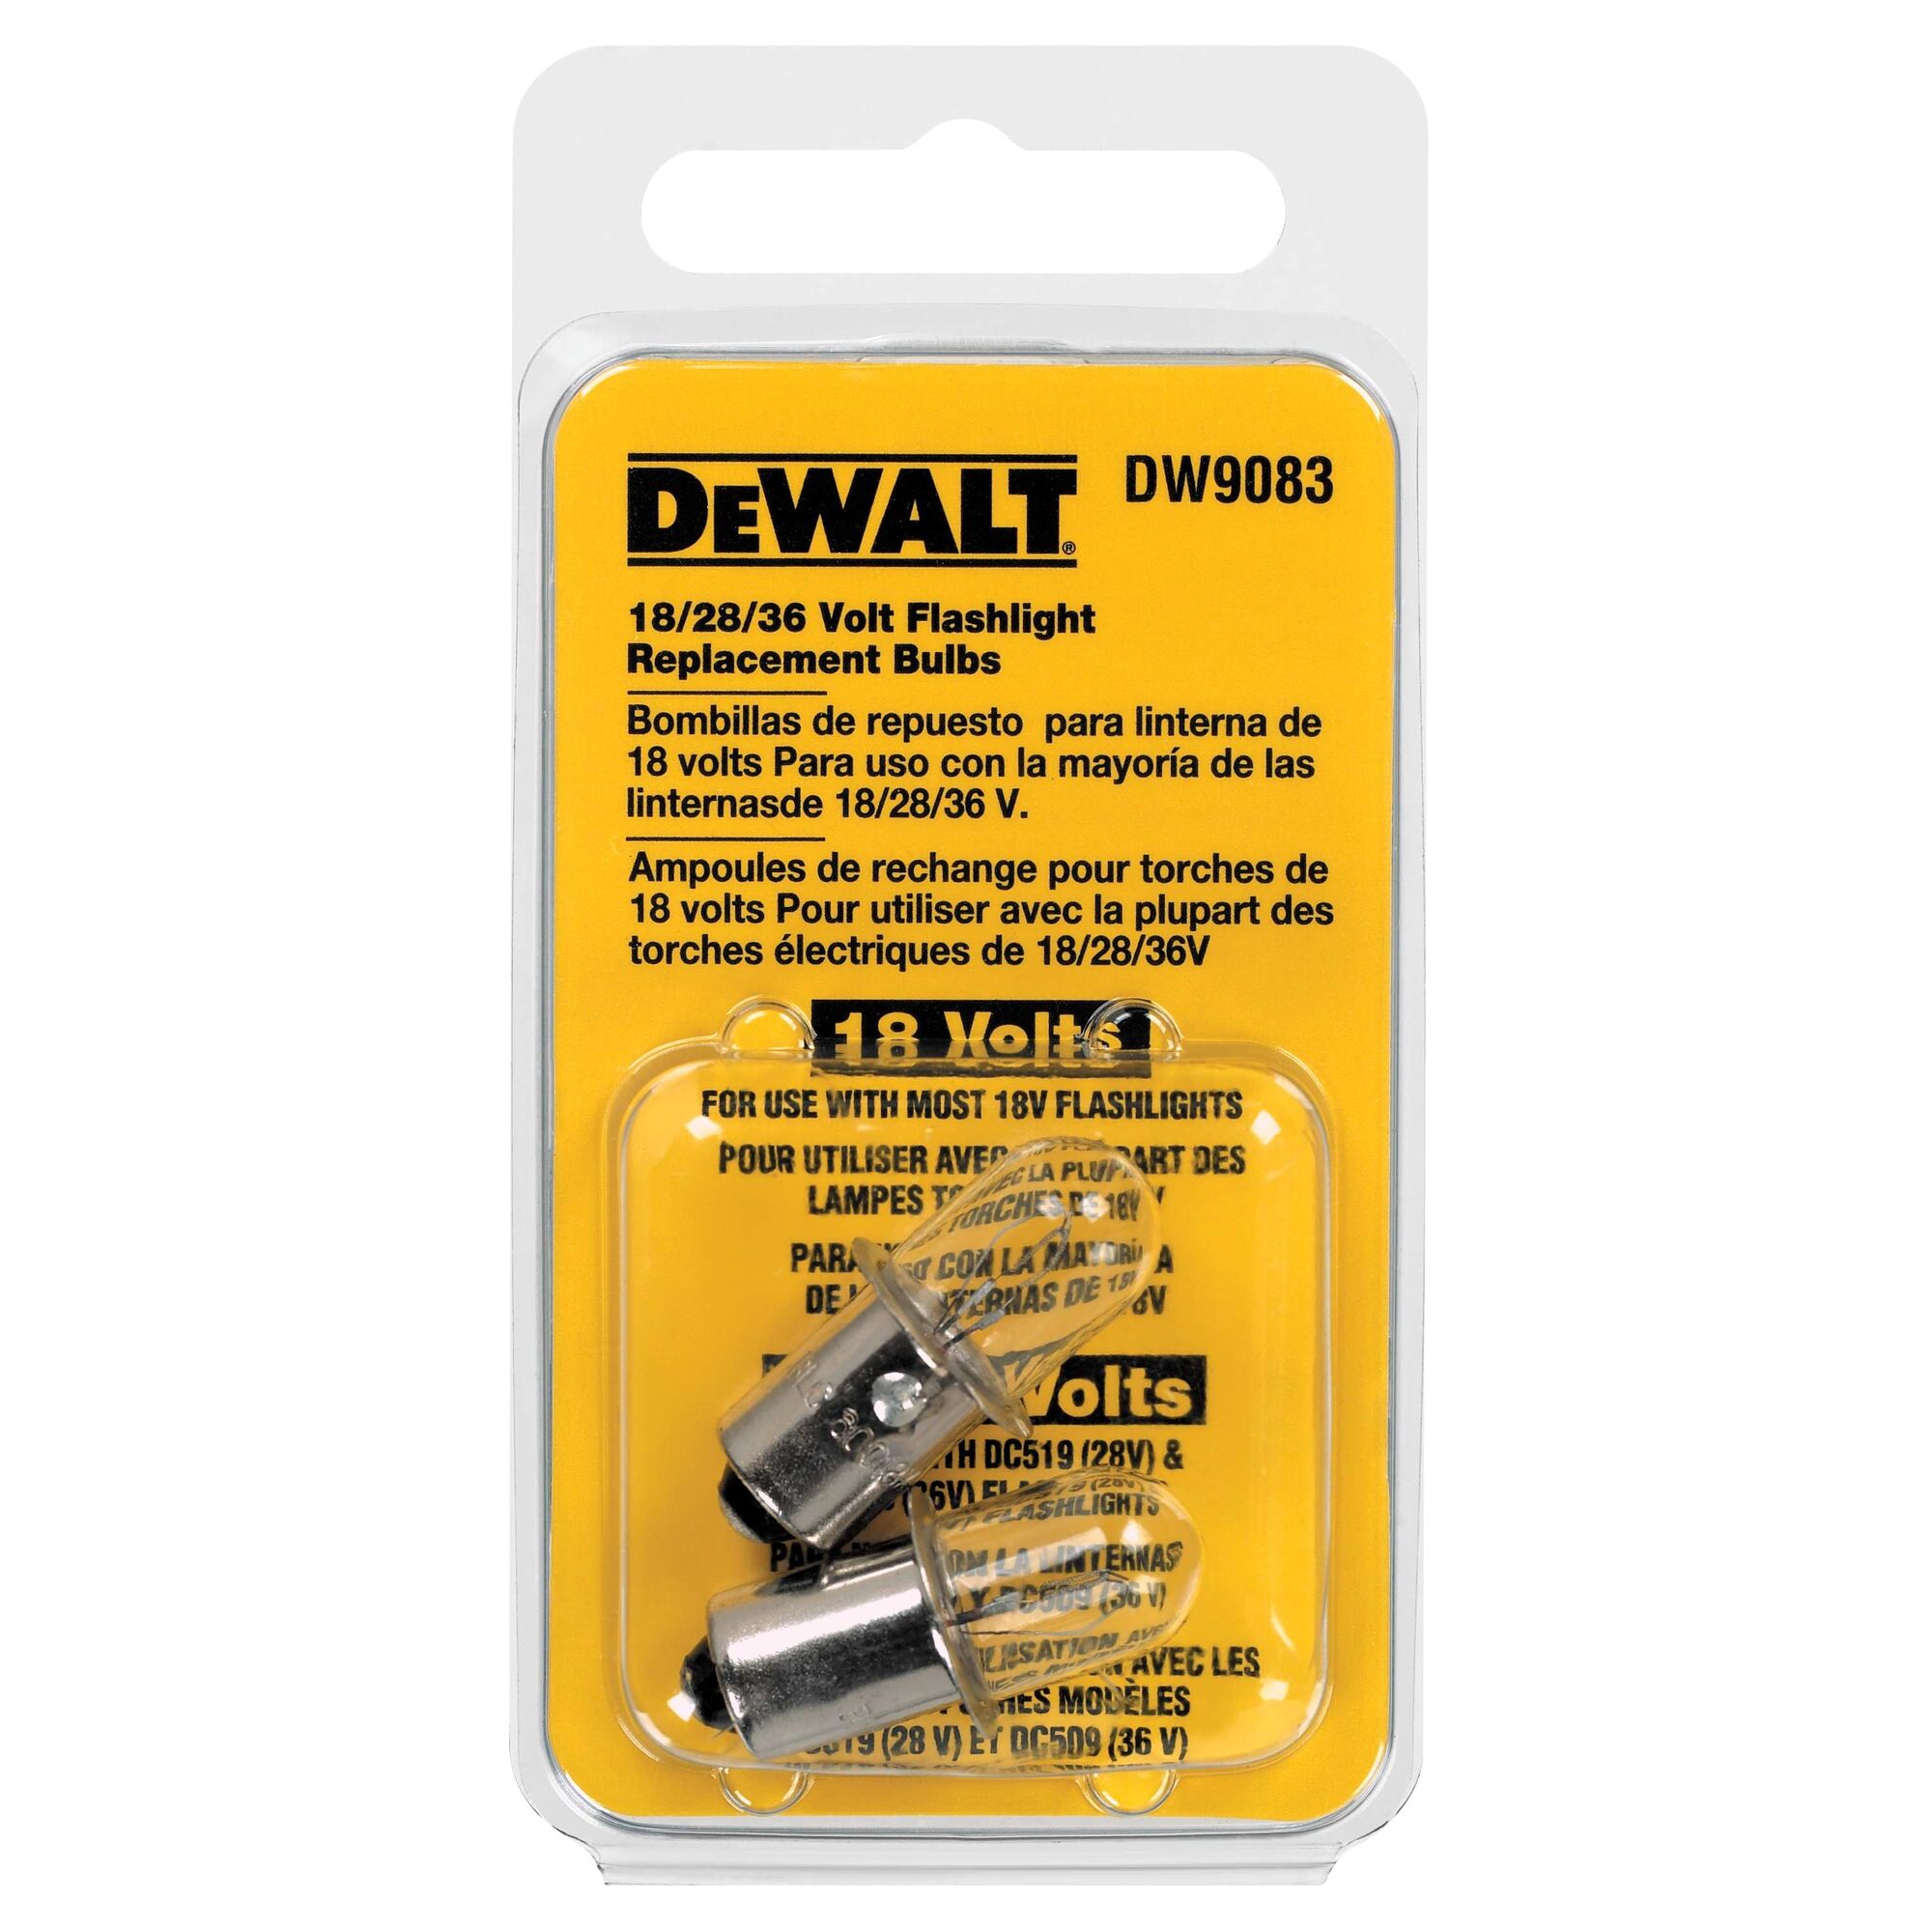 Replacement BULB for Dewalt DC509 Flashlight US SELLER Torch 